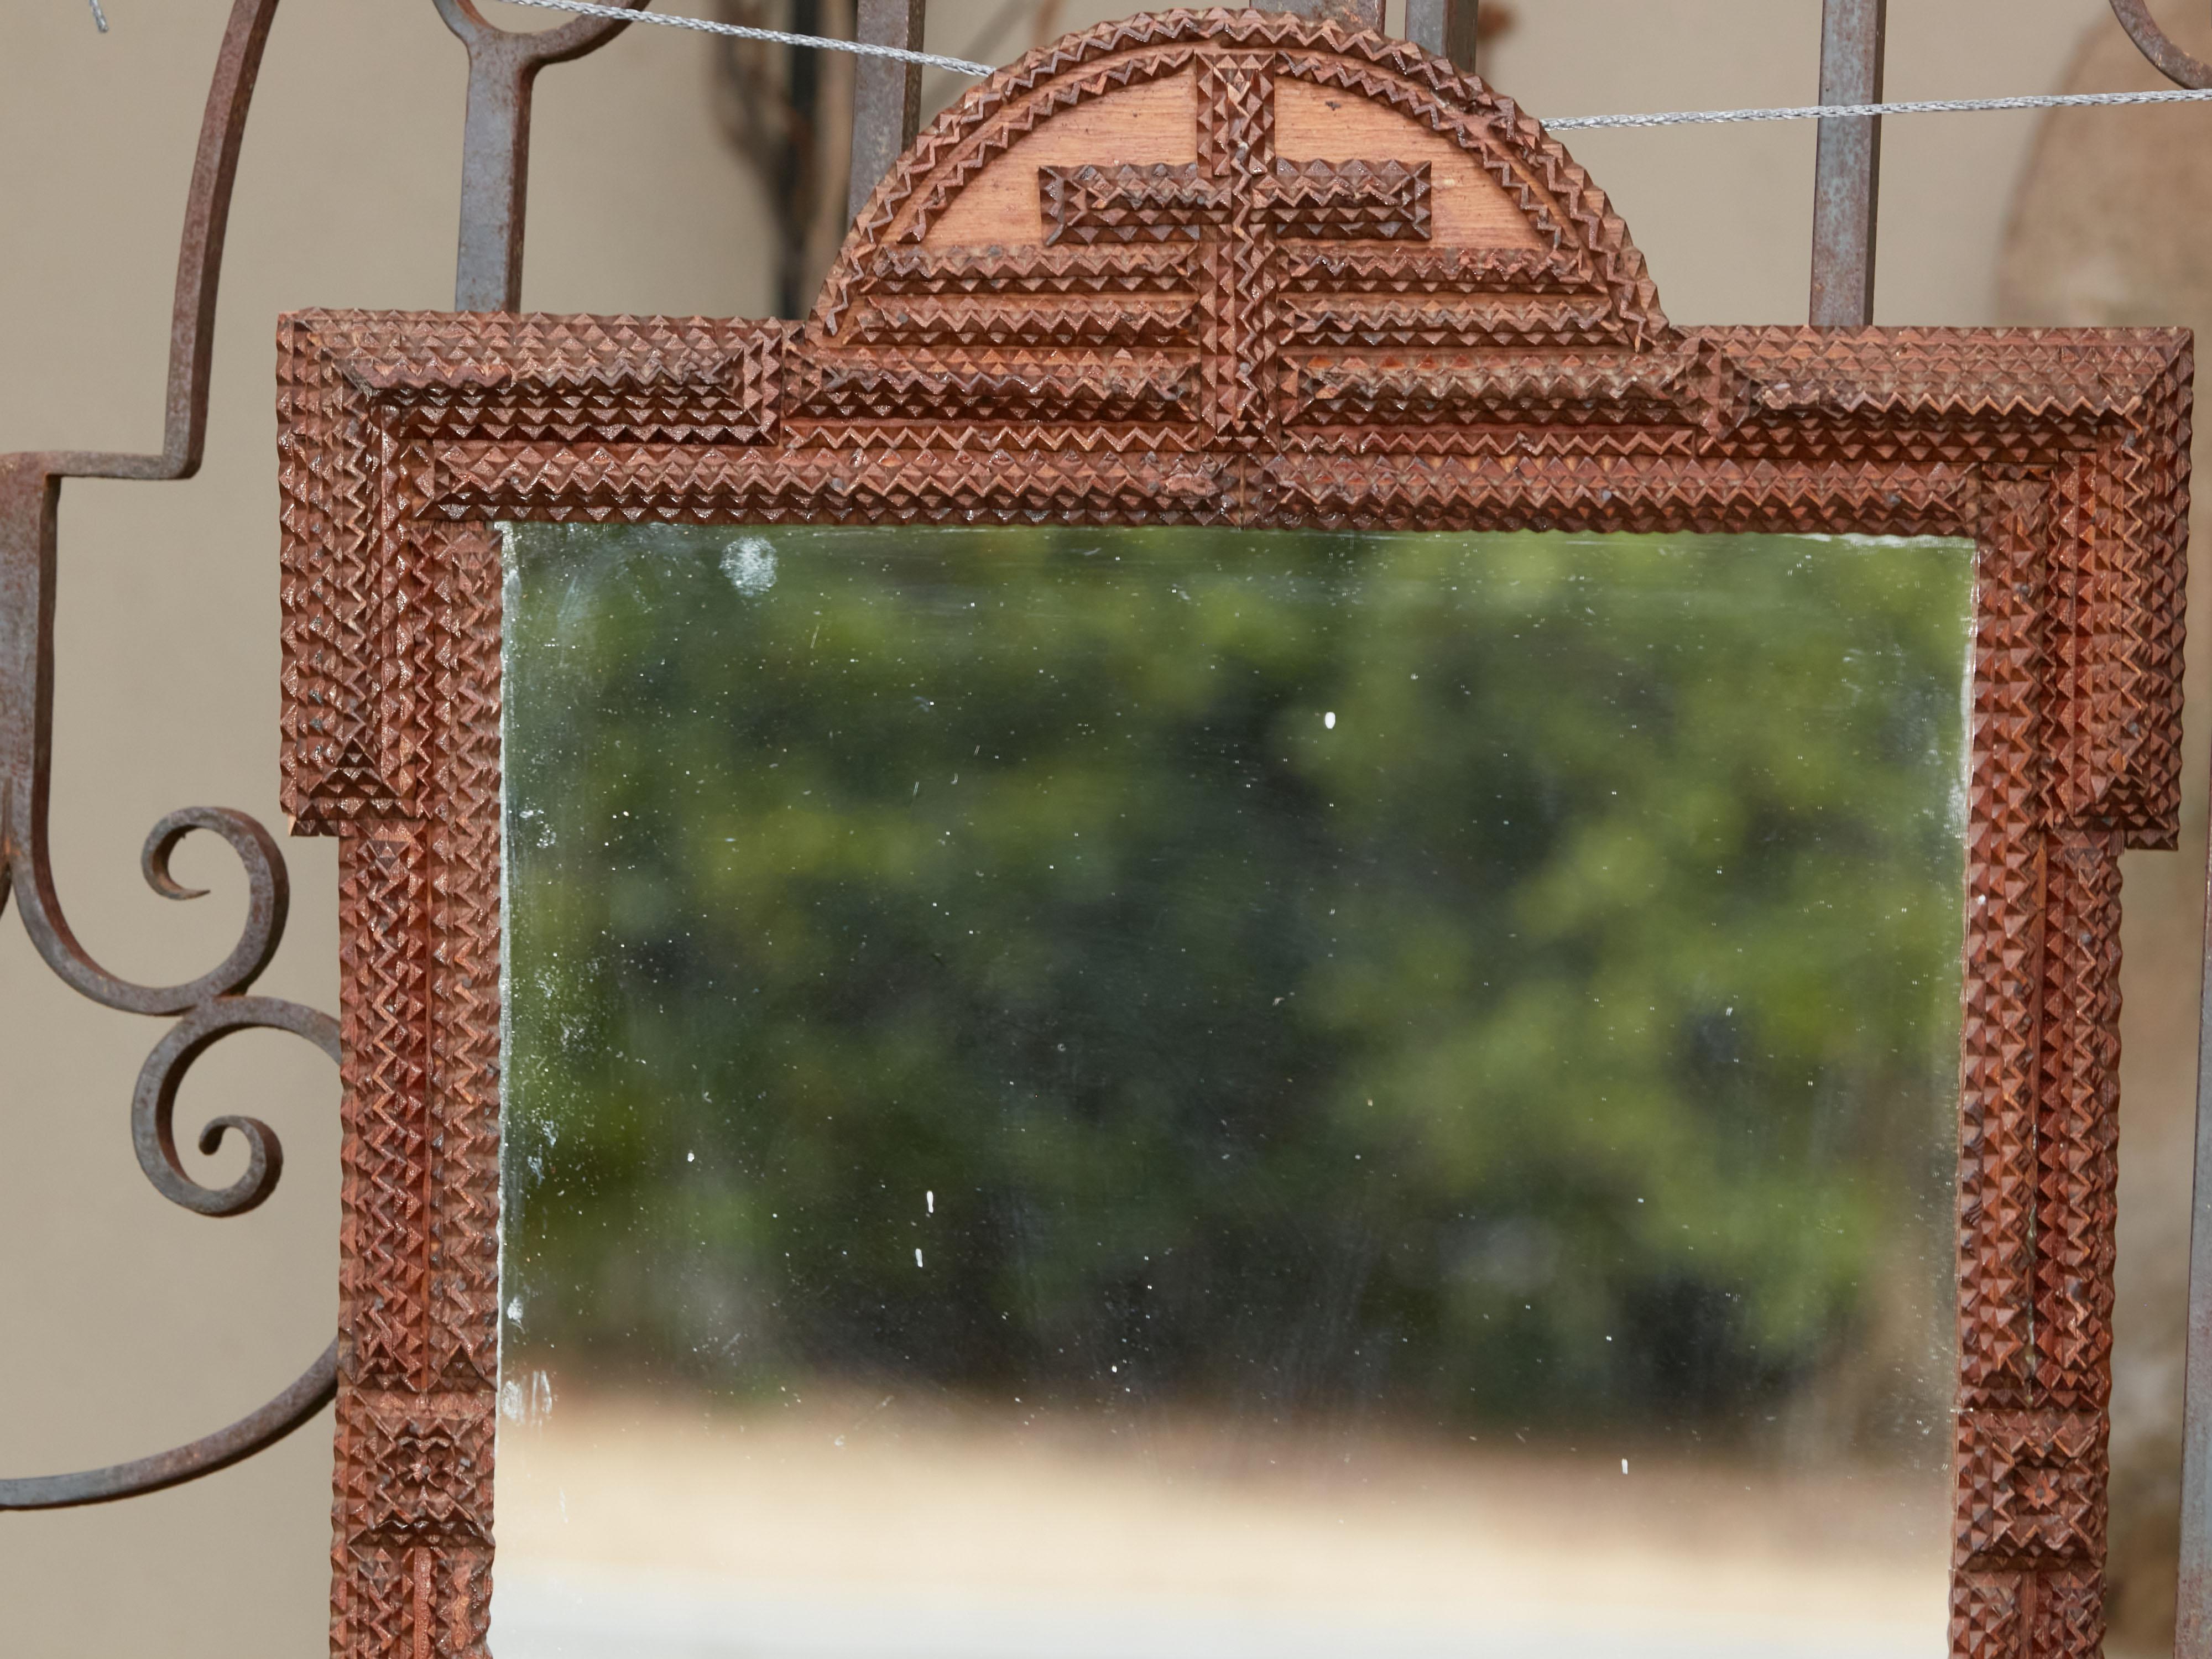 French Turn of the Century Tramp Art Mirror with Arching Crest and Cross Motif 1